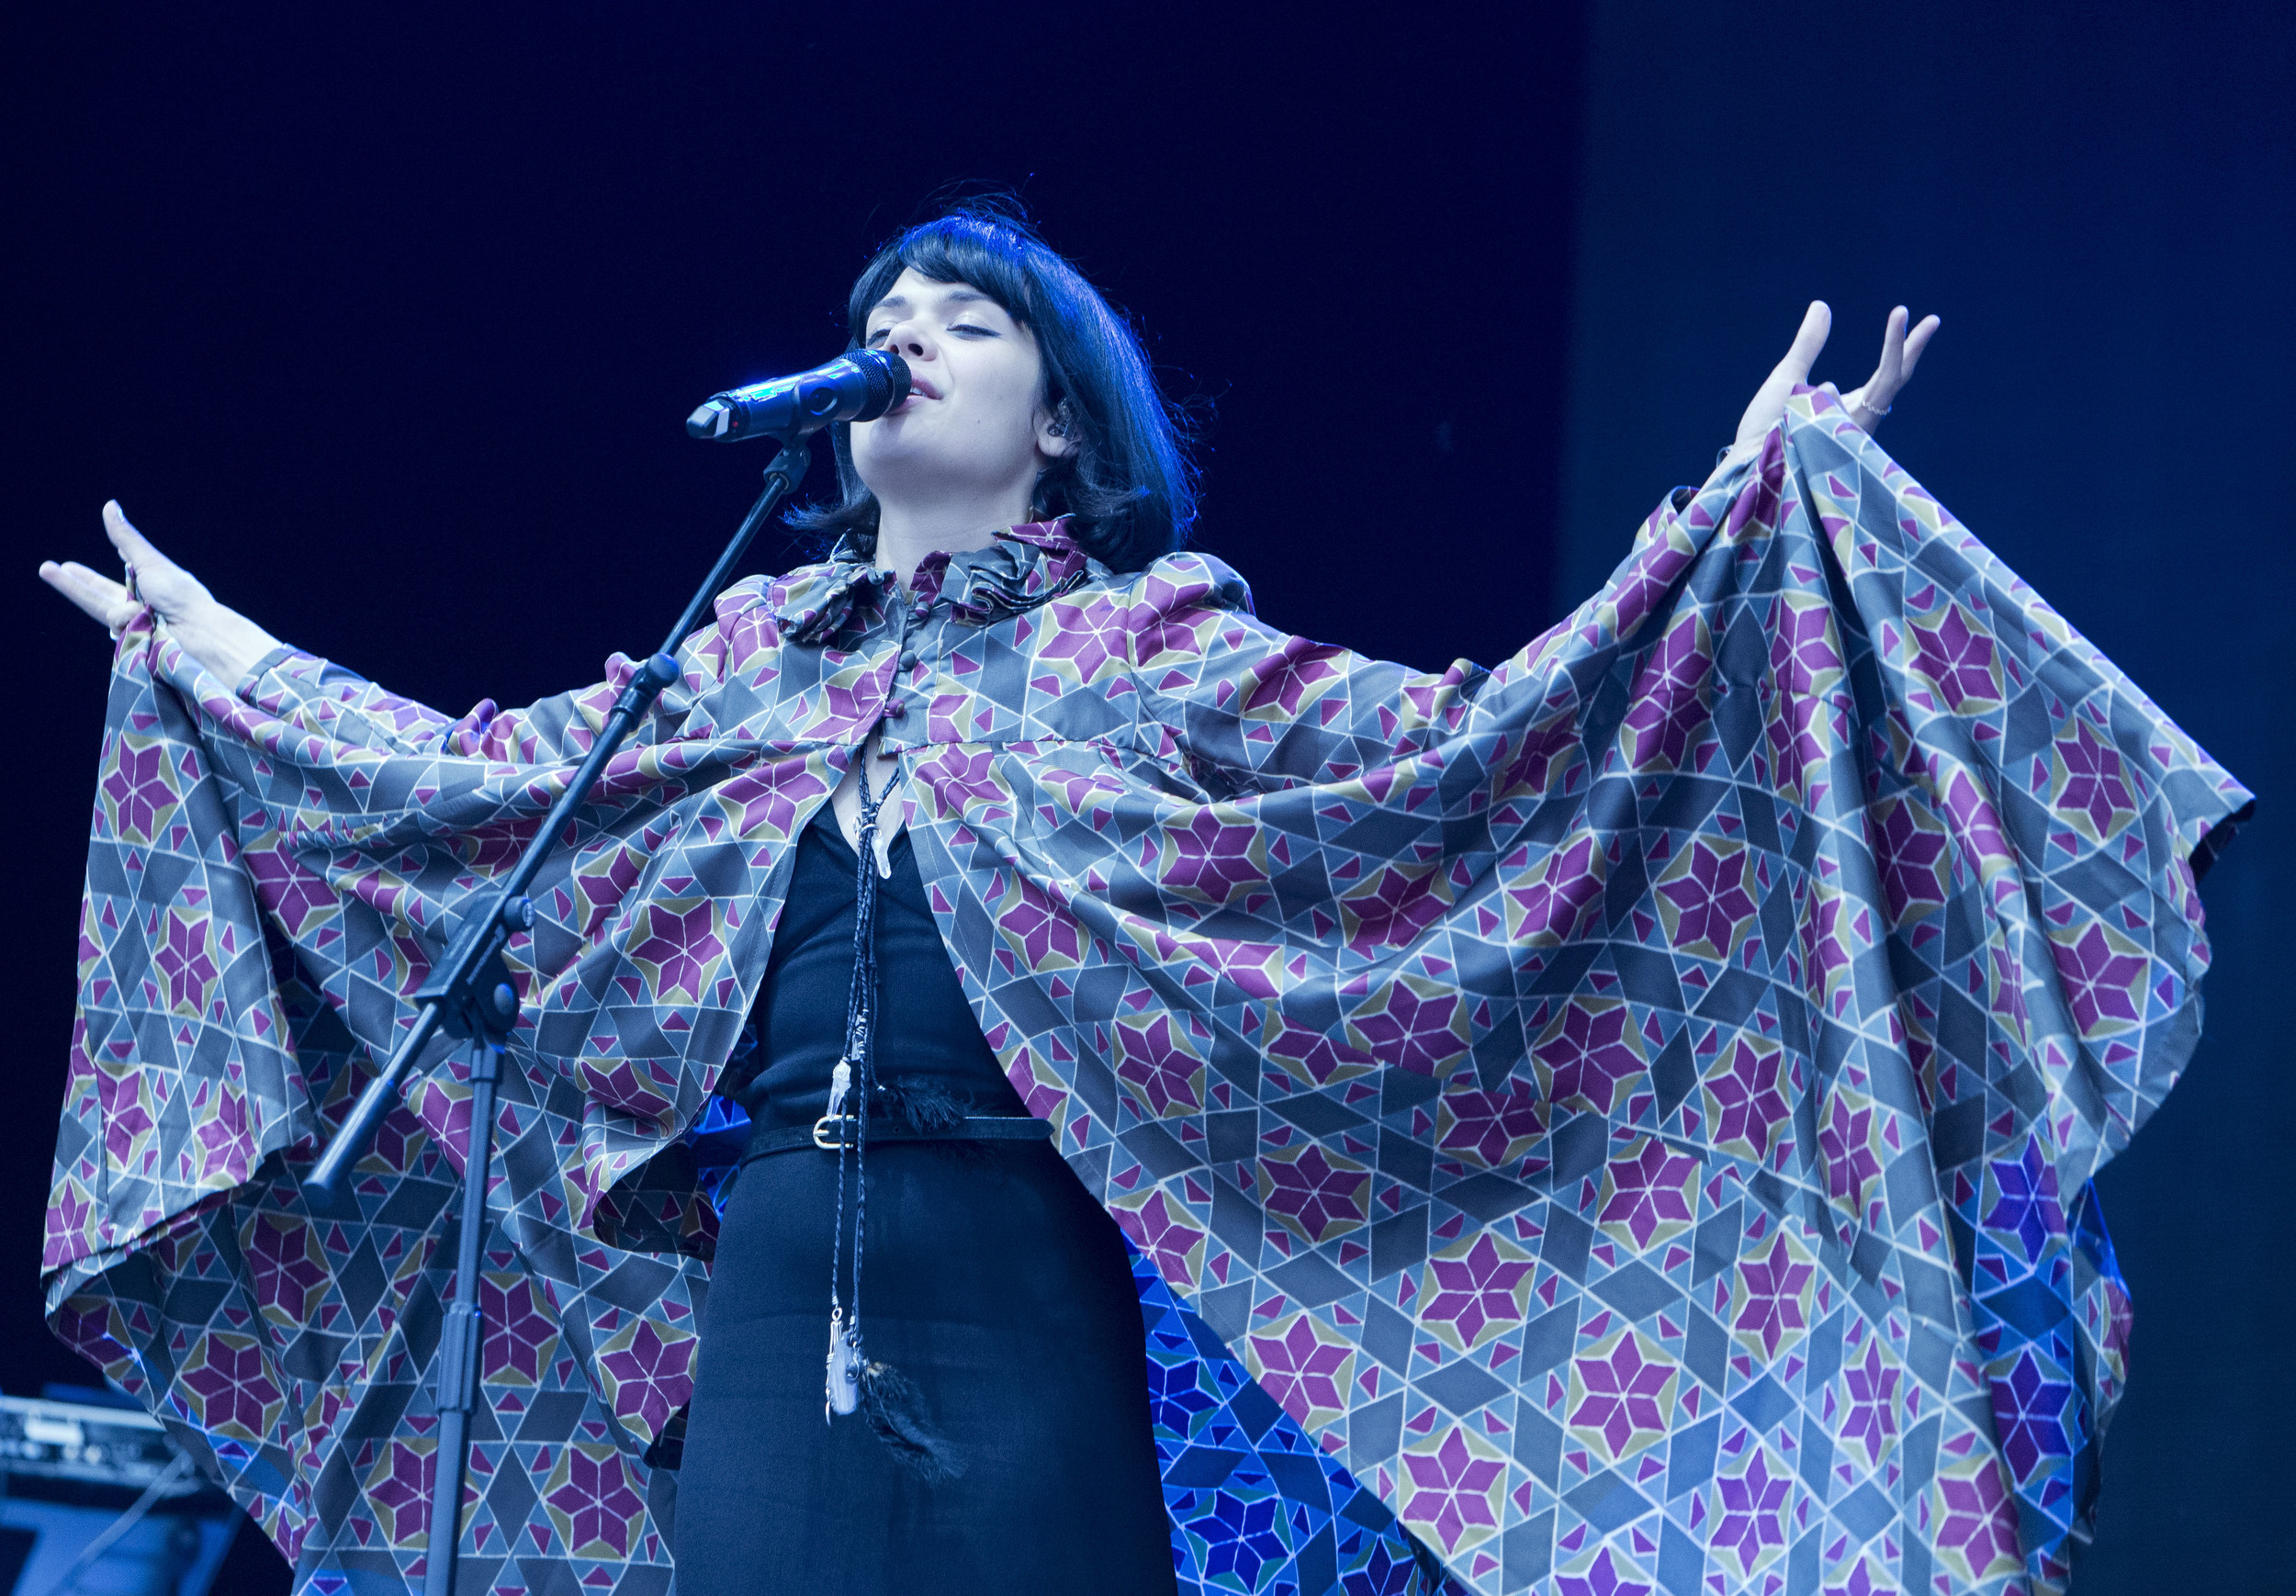 Bat For Lashes at Bestival